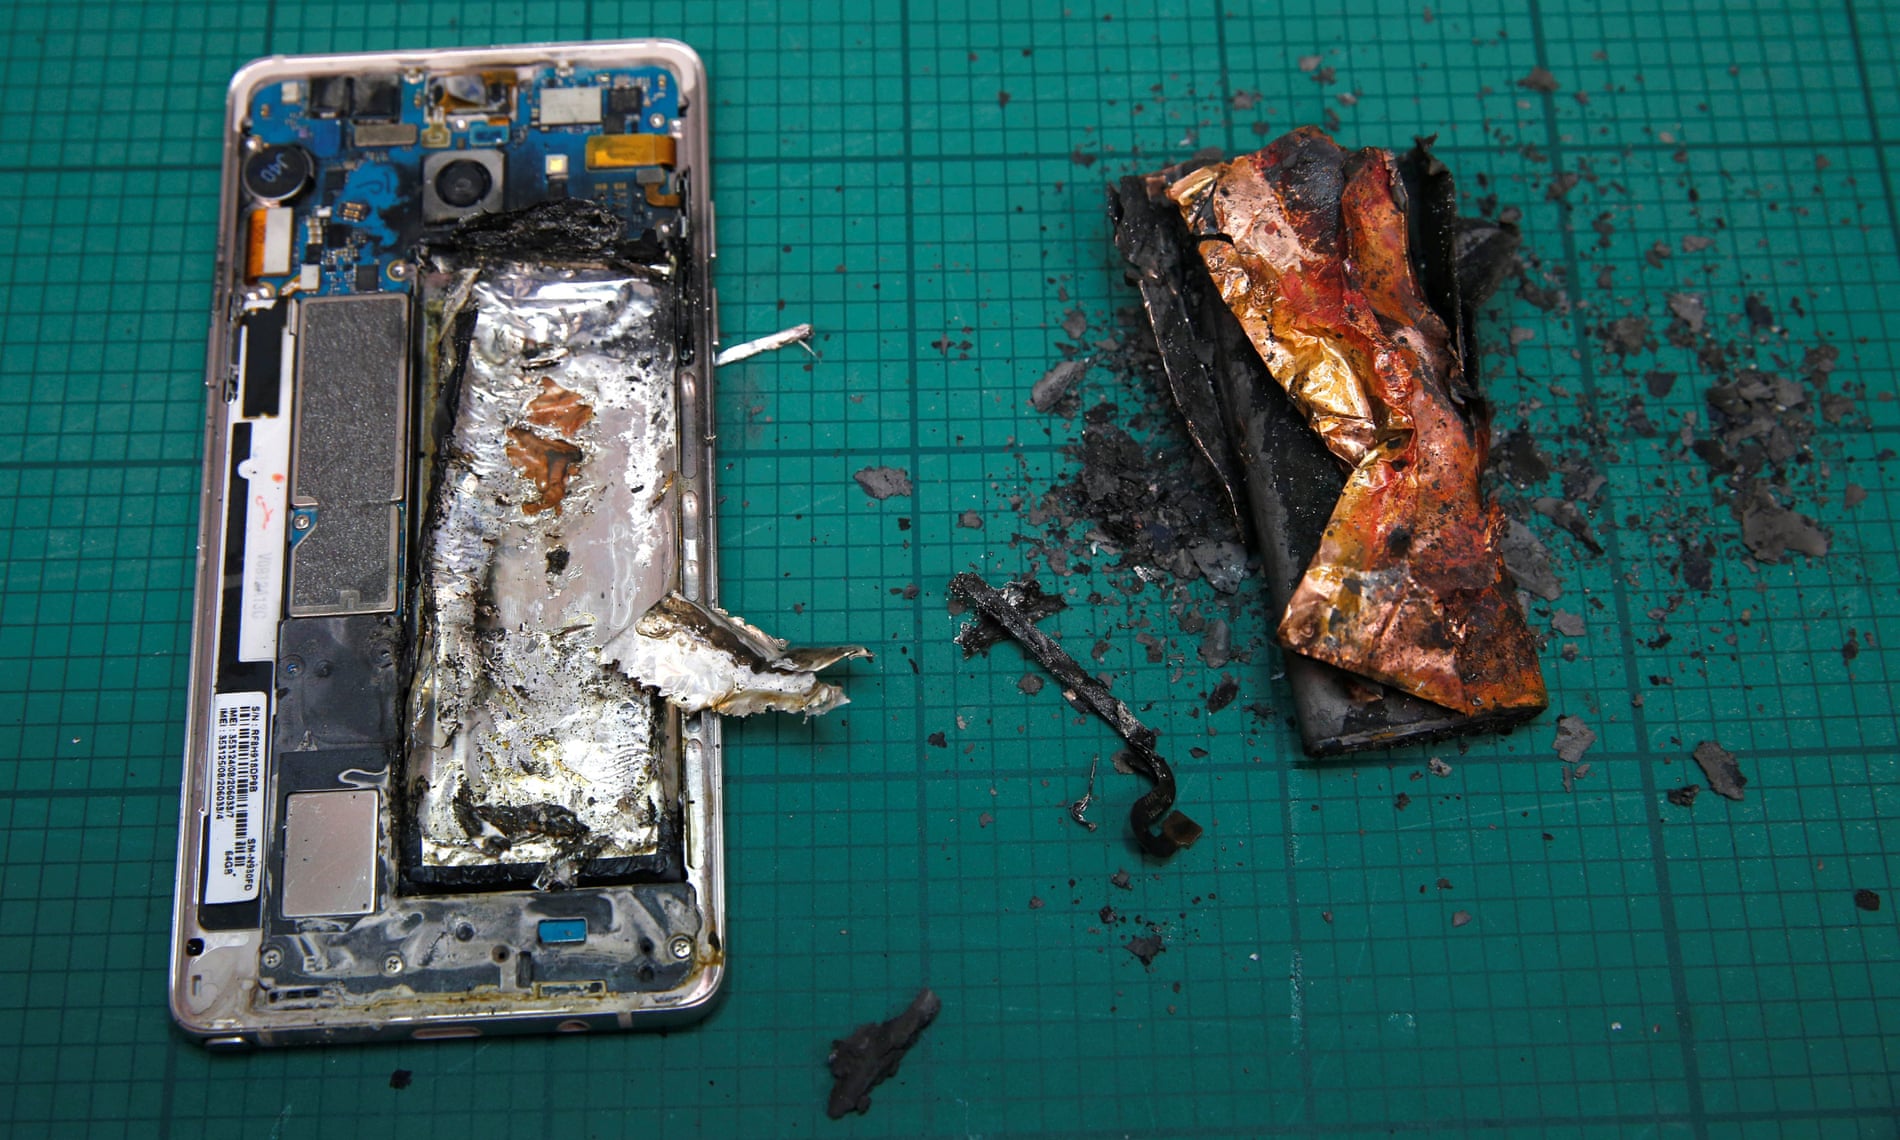 A Samsung Note 7 handset is pictured next to its burnt battery after catching firy during a test in a laboratory.